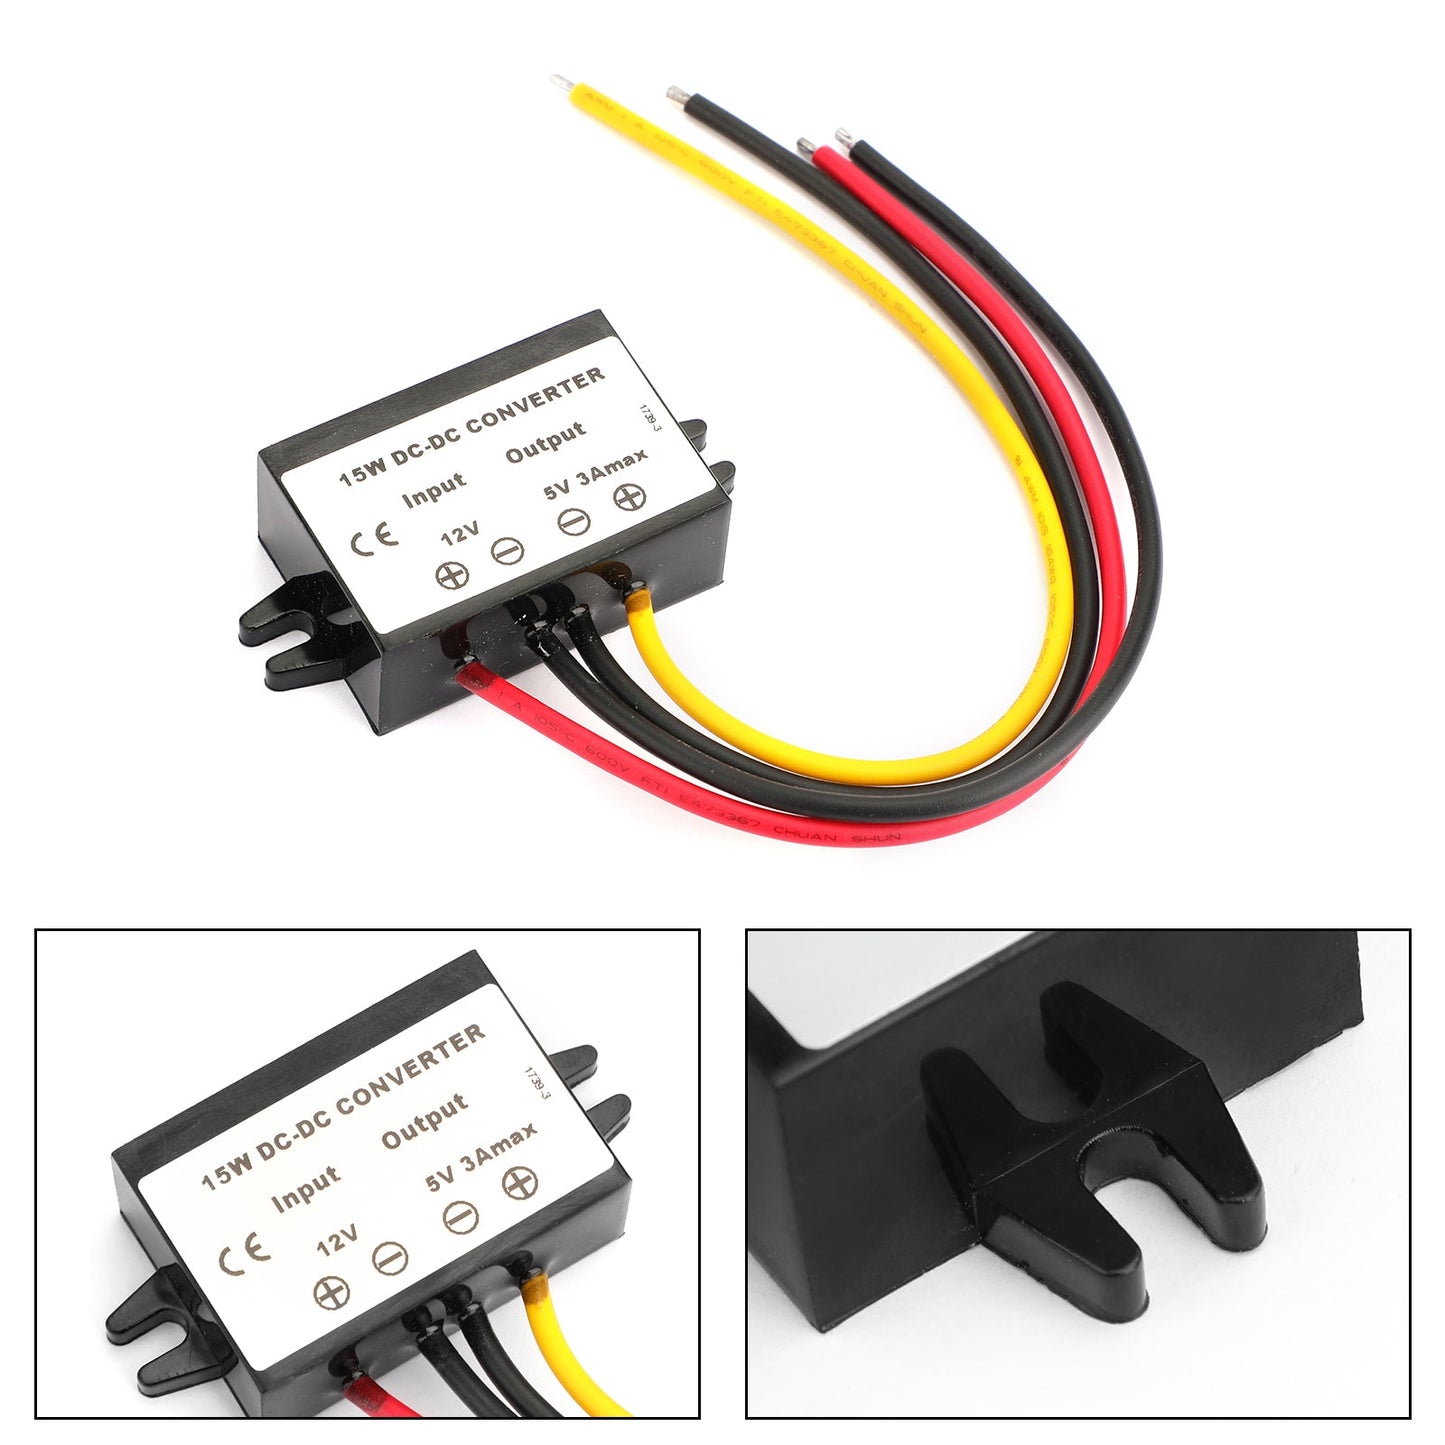 Better Waterproof DC-DC Converter 12V Step Down to 5V Car Power Supply Module 3A